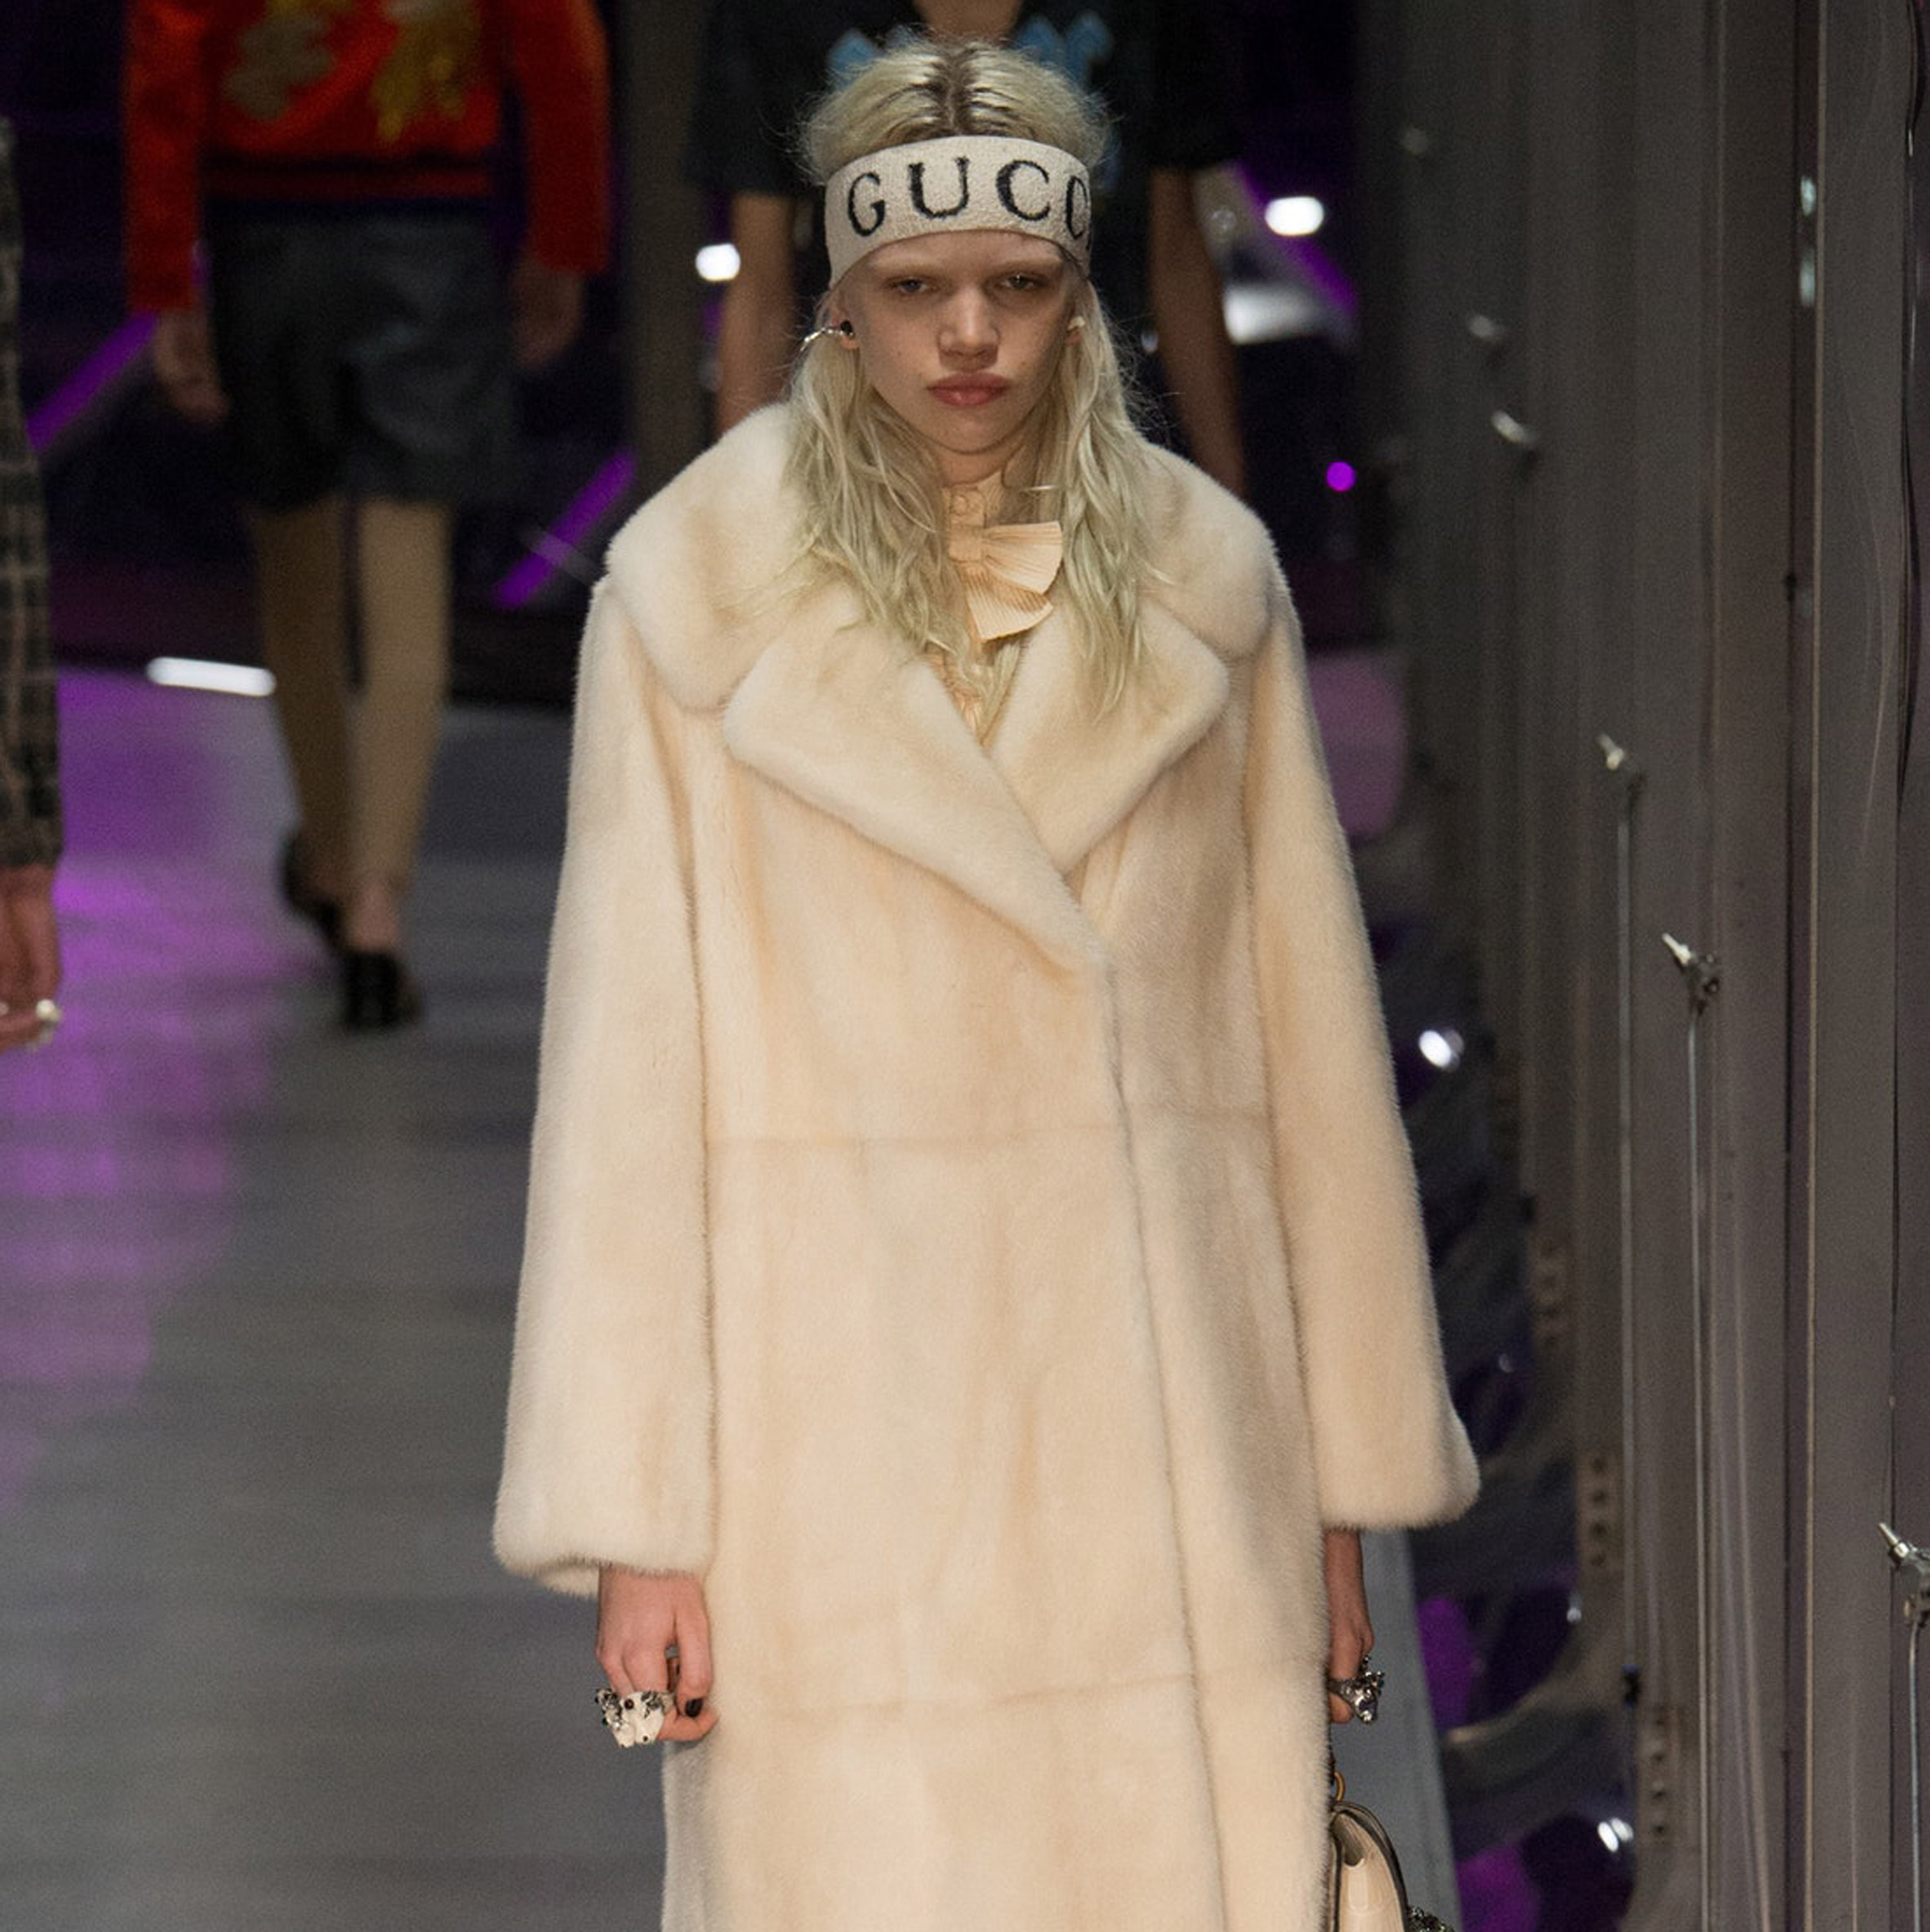 Gucci pledges to stop using animal fur in its fashion collections